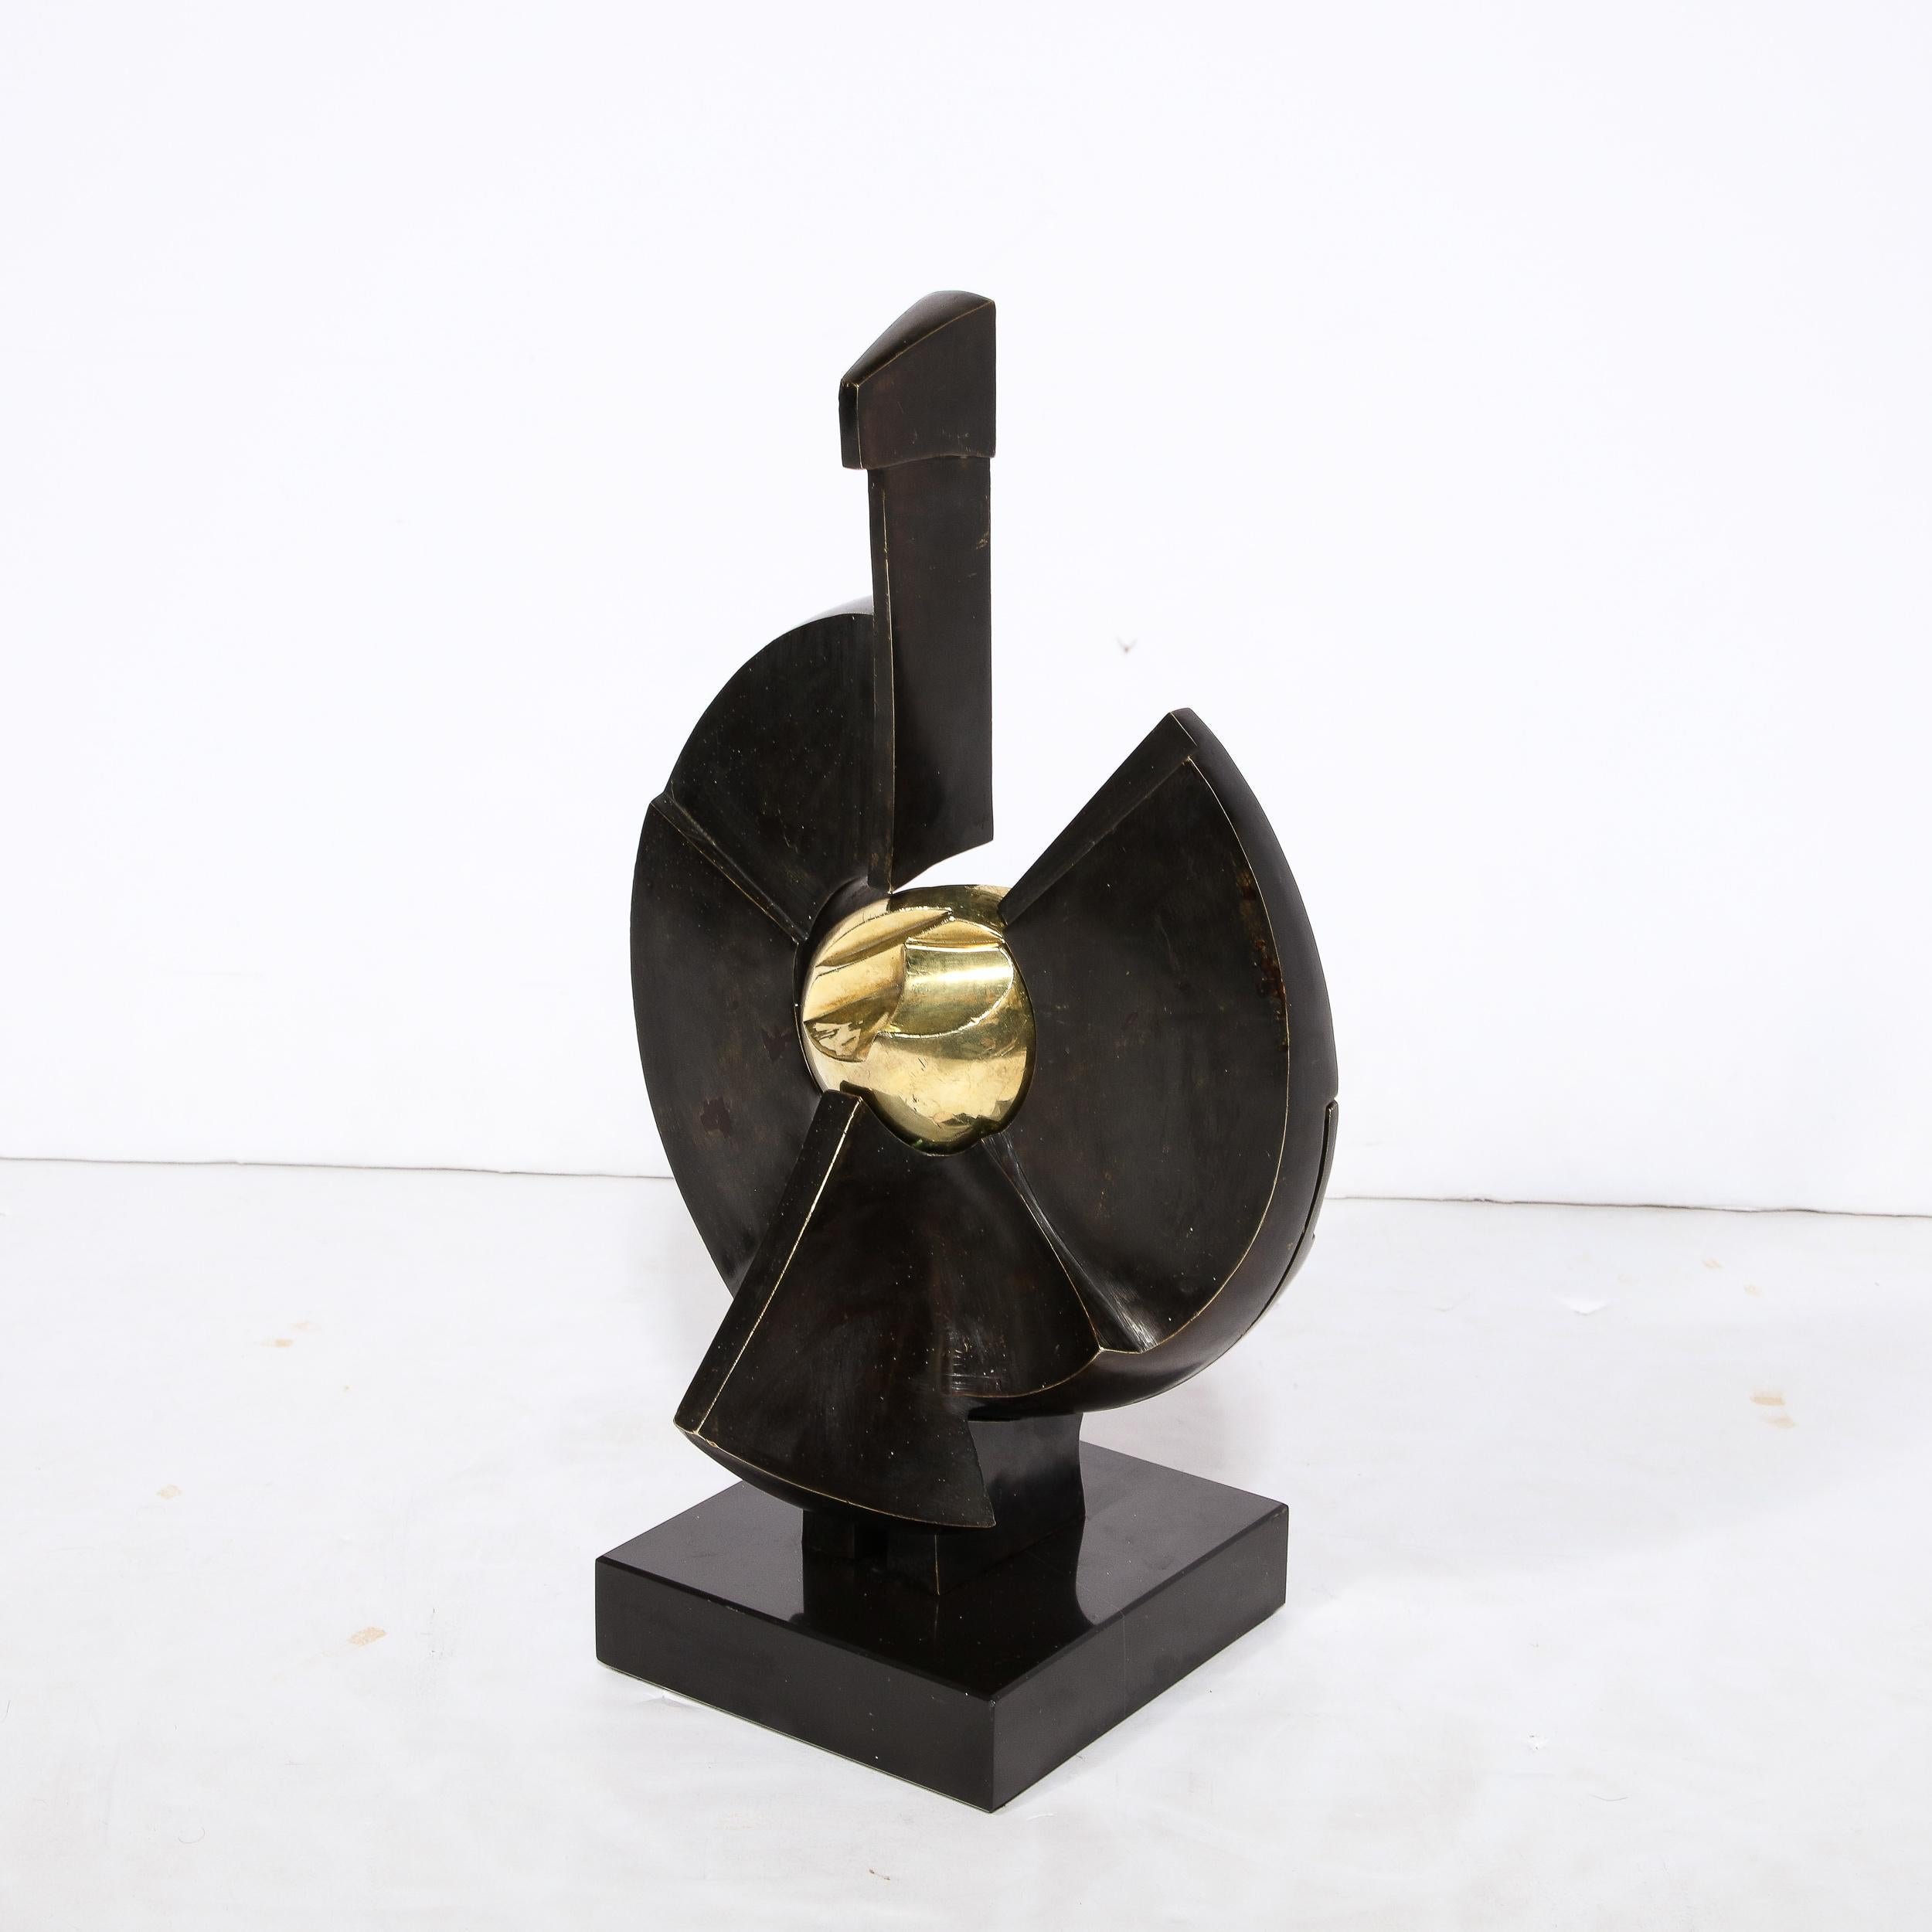 Articulated Abstract Composition in Double Patina Bronze by Paul Gonez 1 of 8 10